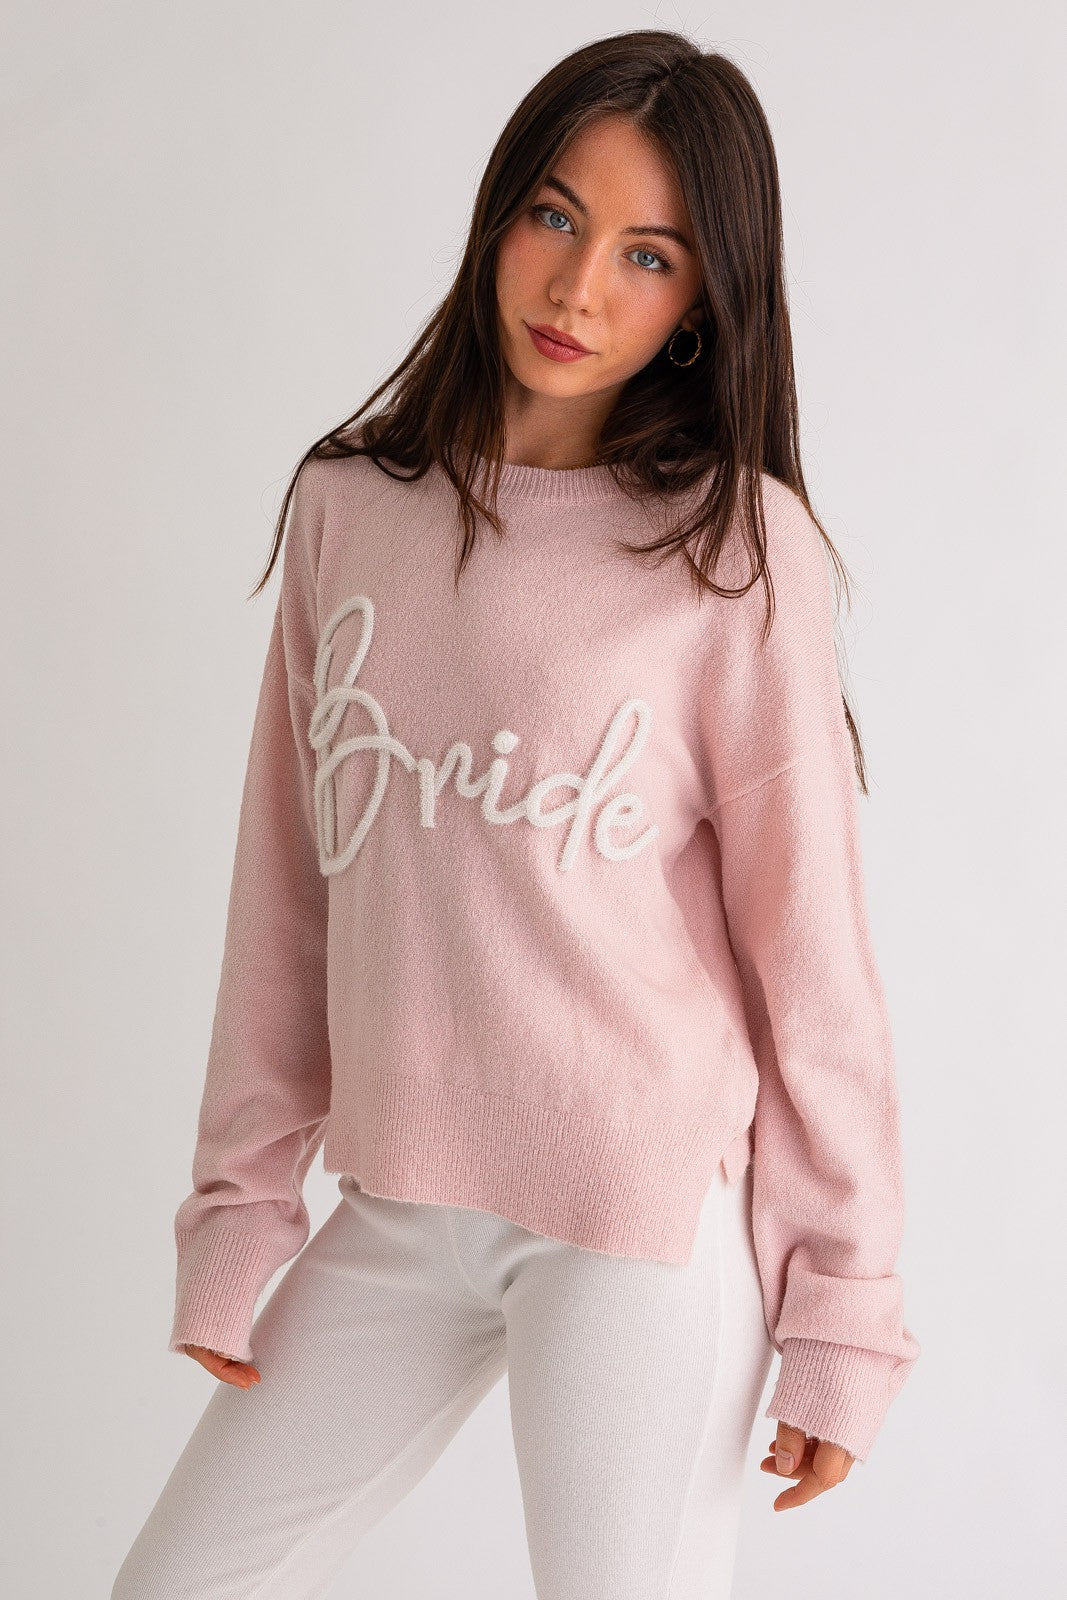 Bride Embroidery Sweater